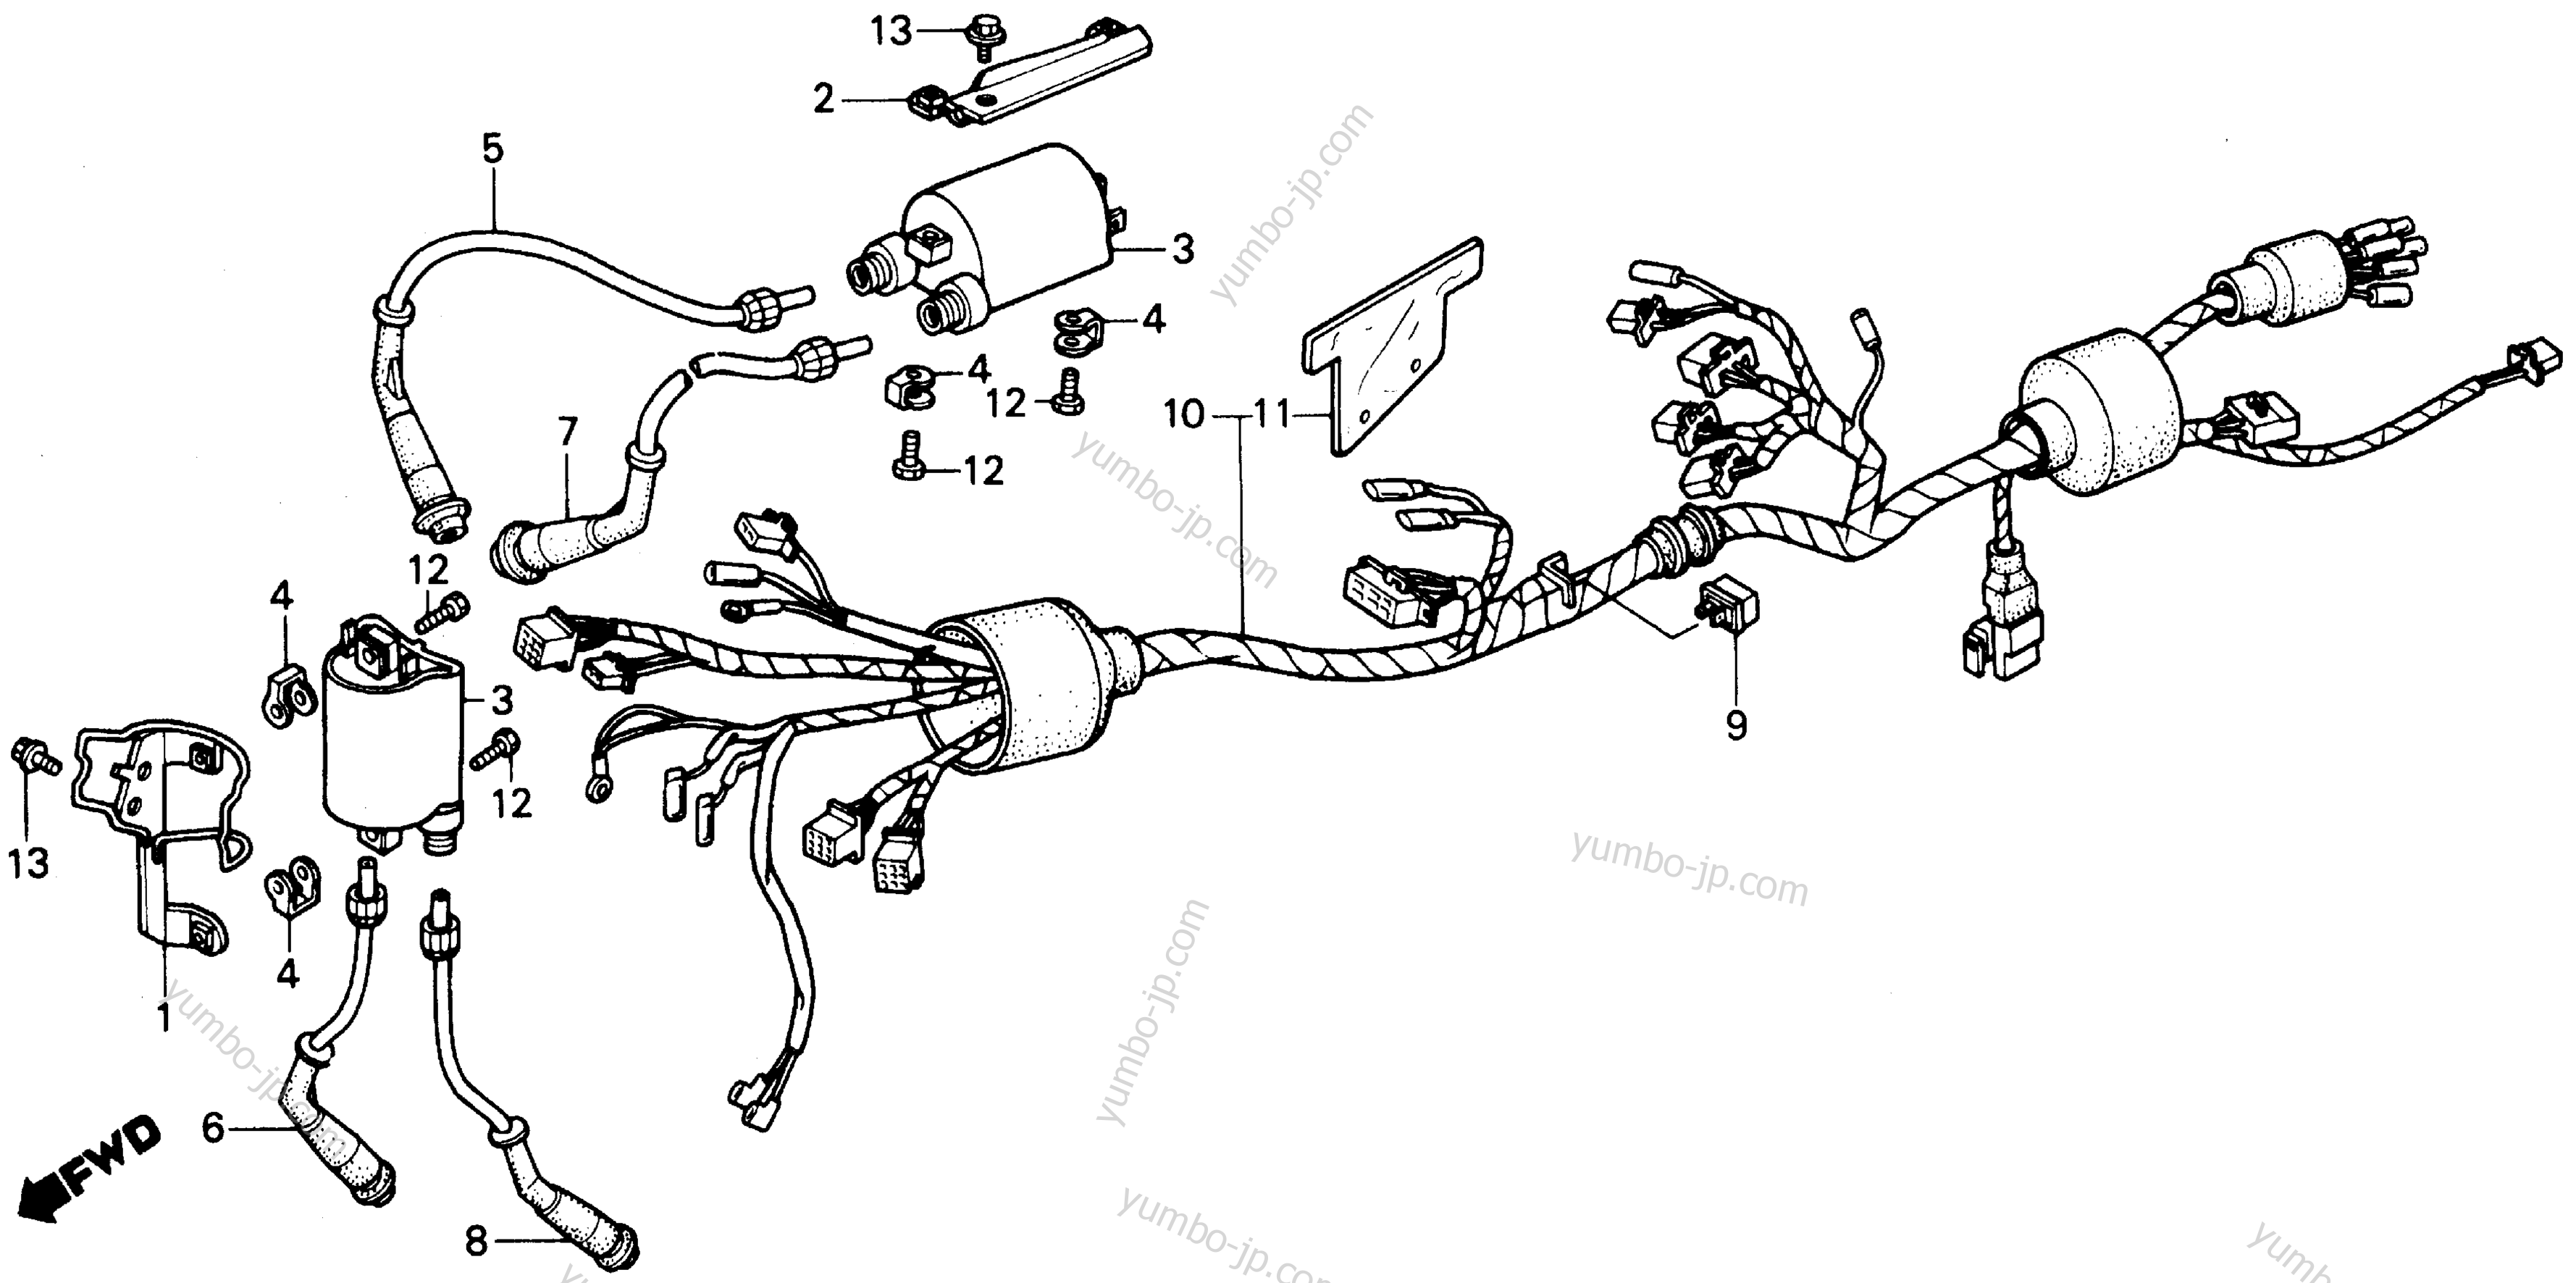 WIRE HARNESS for motorcycles HONDA VF700C A 1987 year